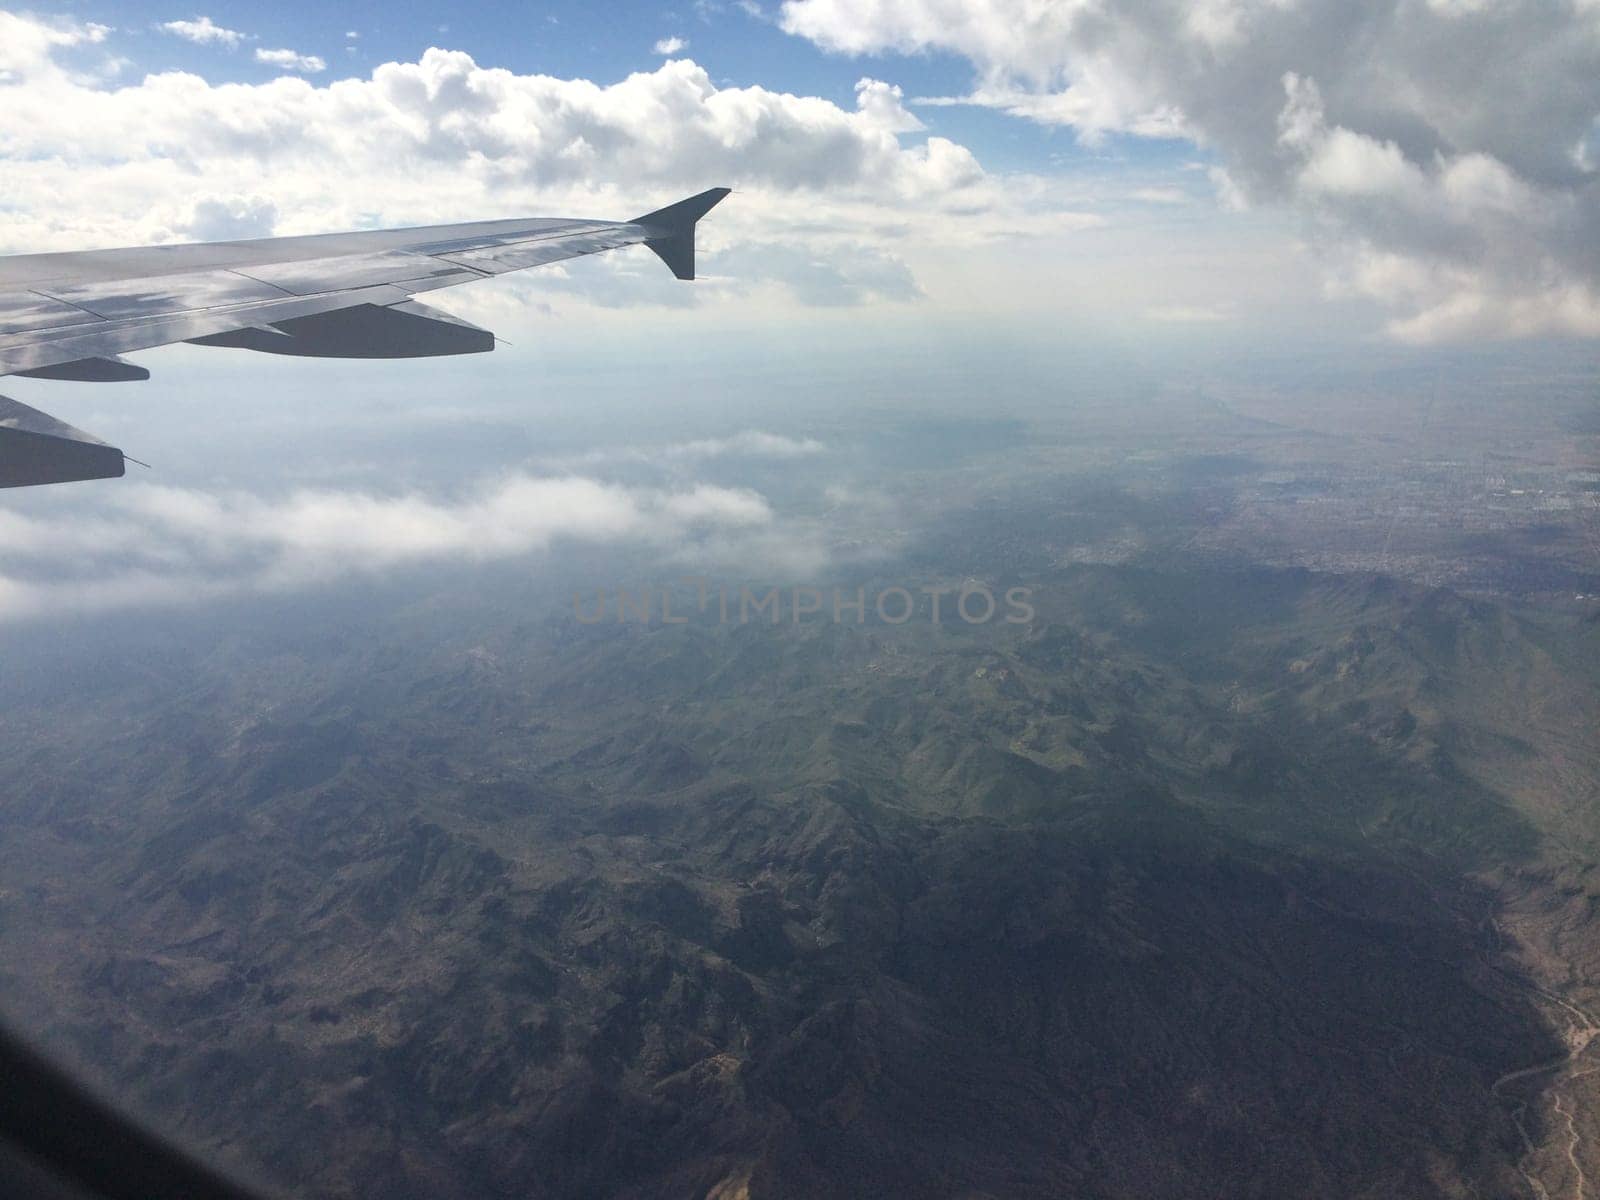 View from Airplane Window of Mountains and Clouds. High quality photo